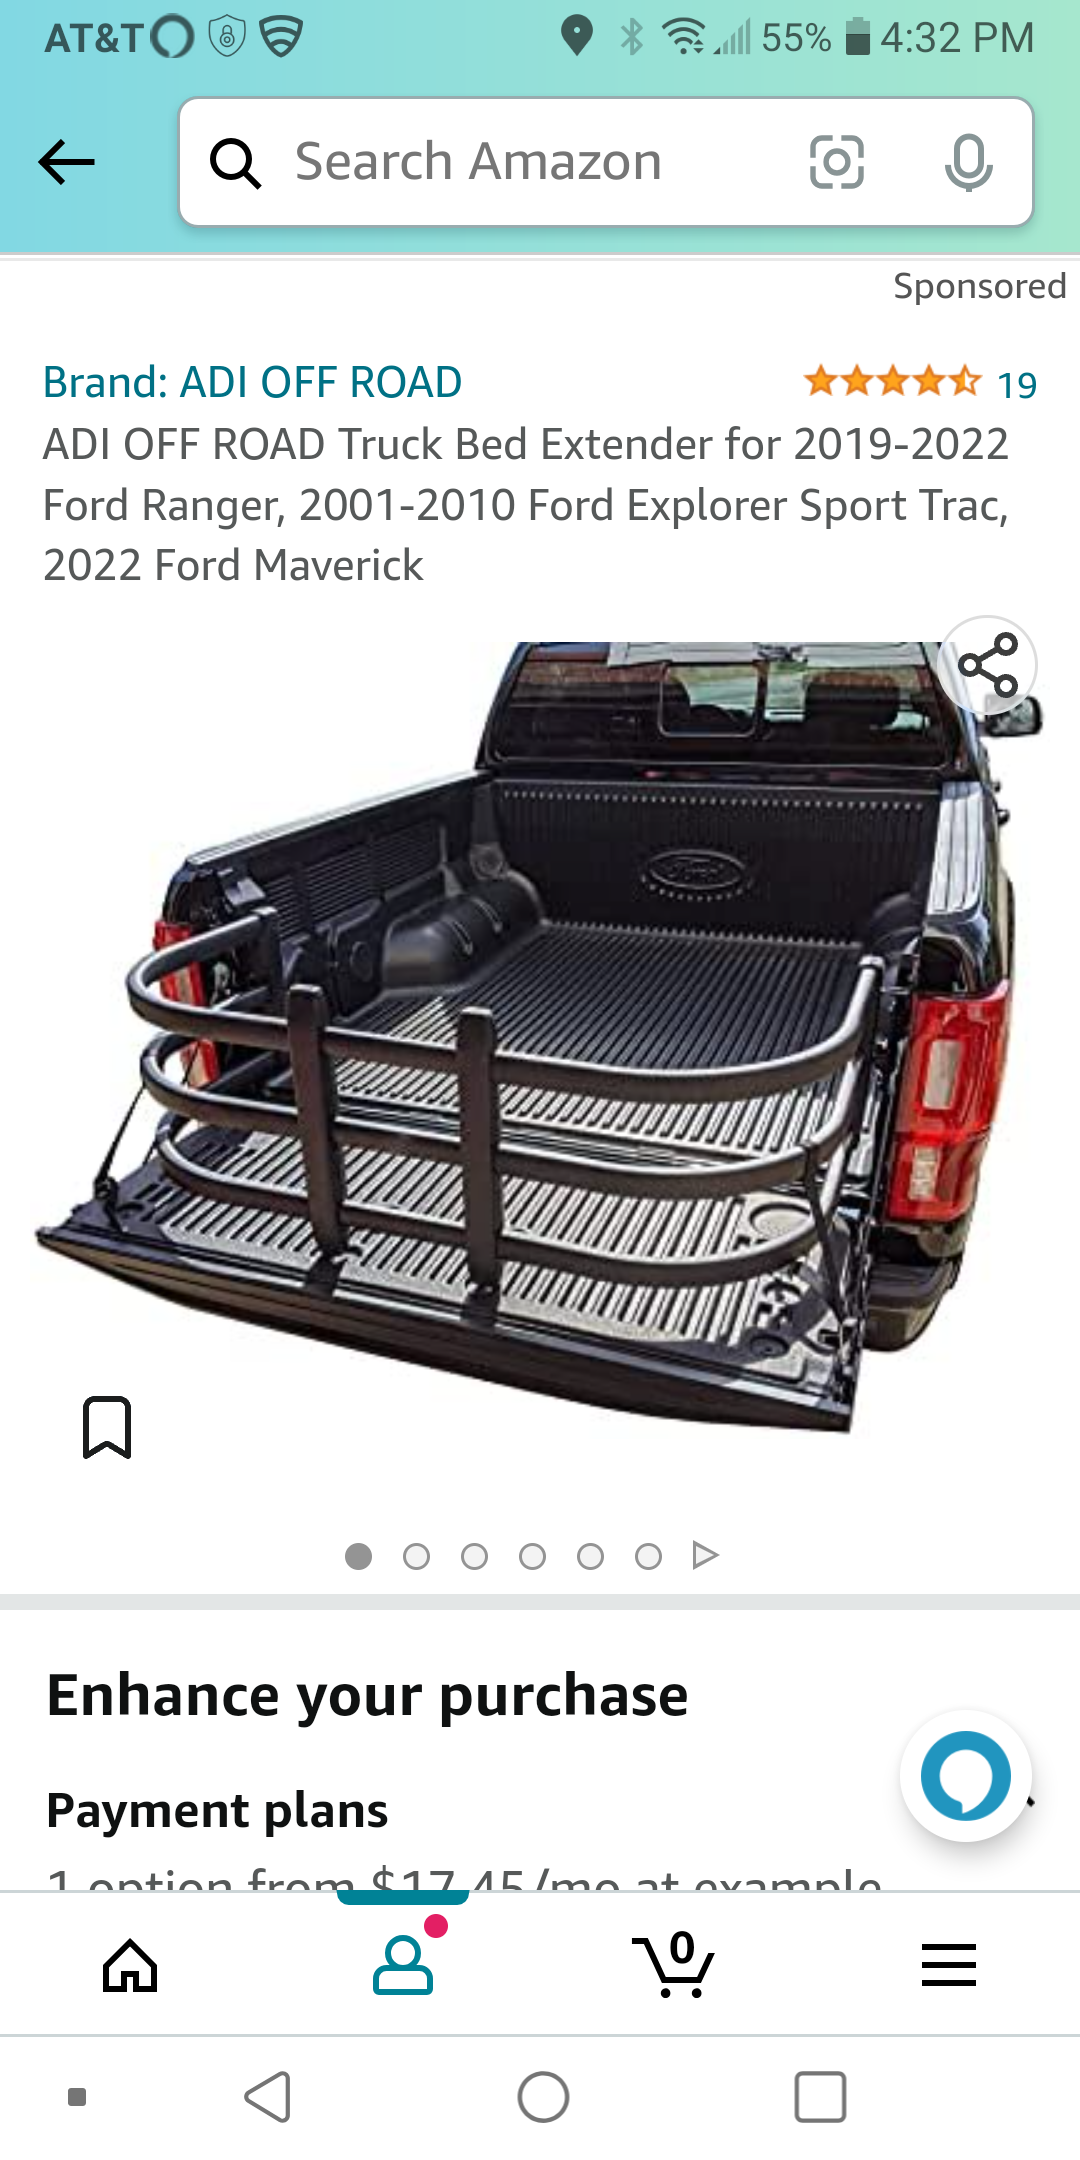 OEM Ford vs Third-party bed extender?